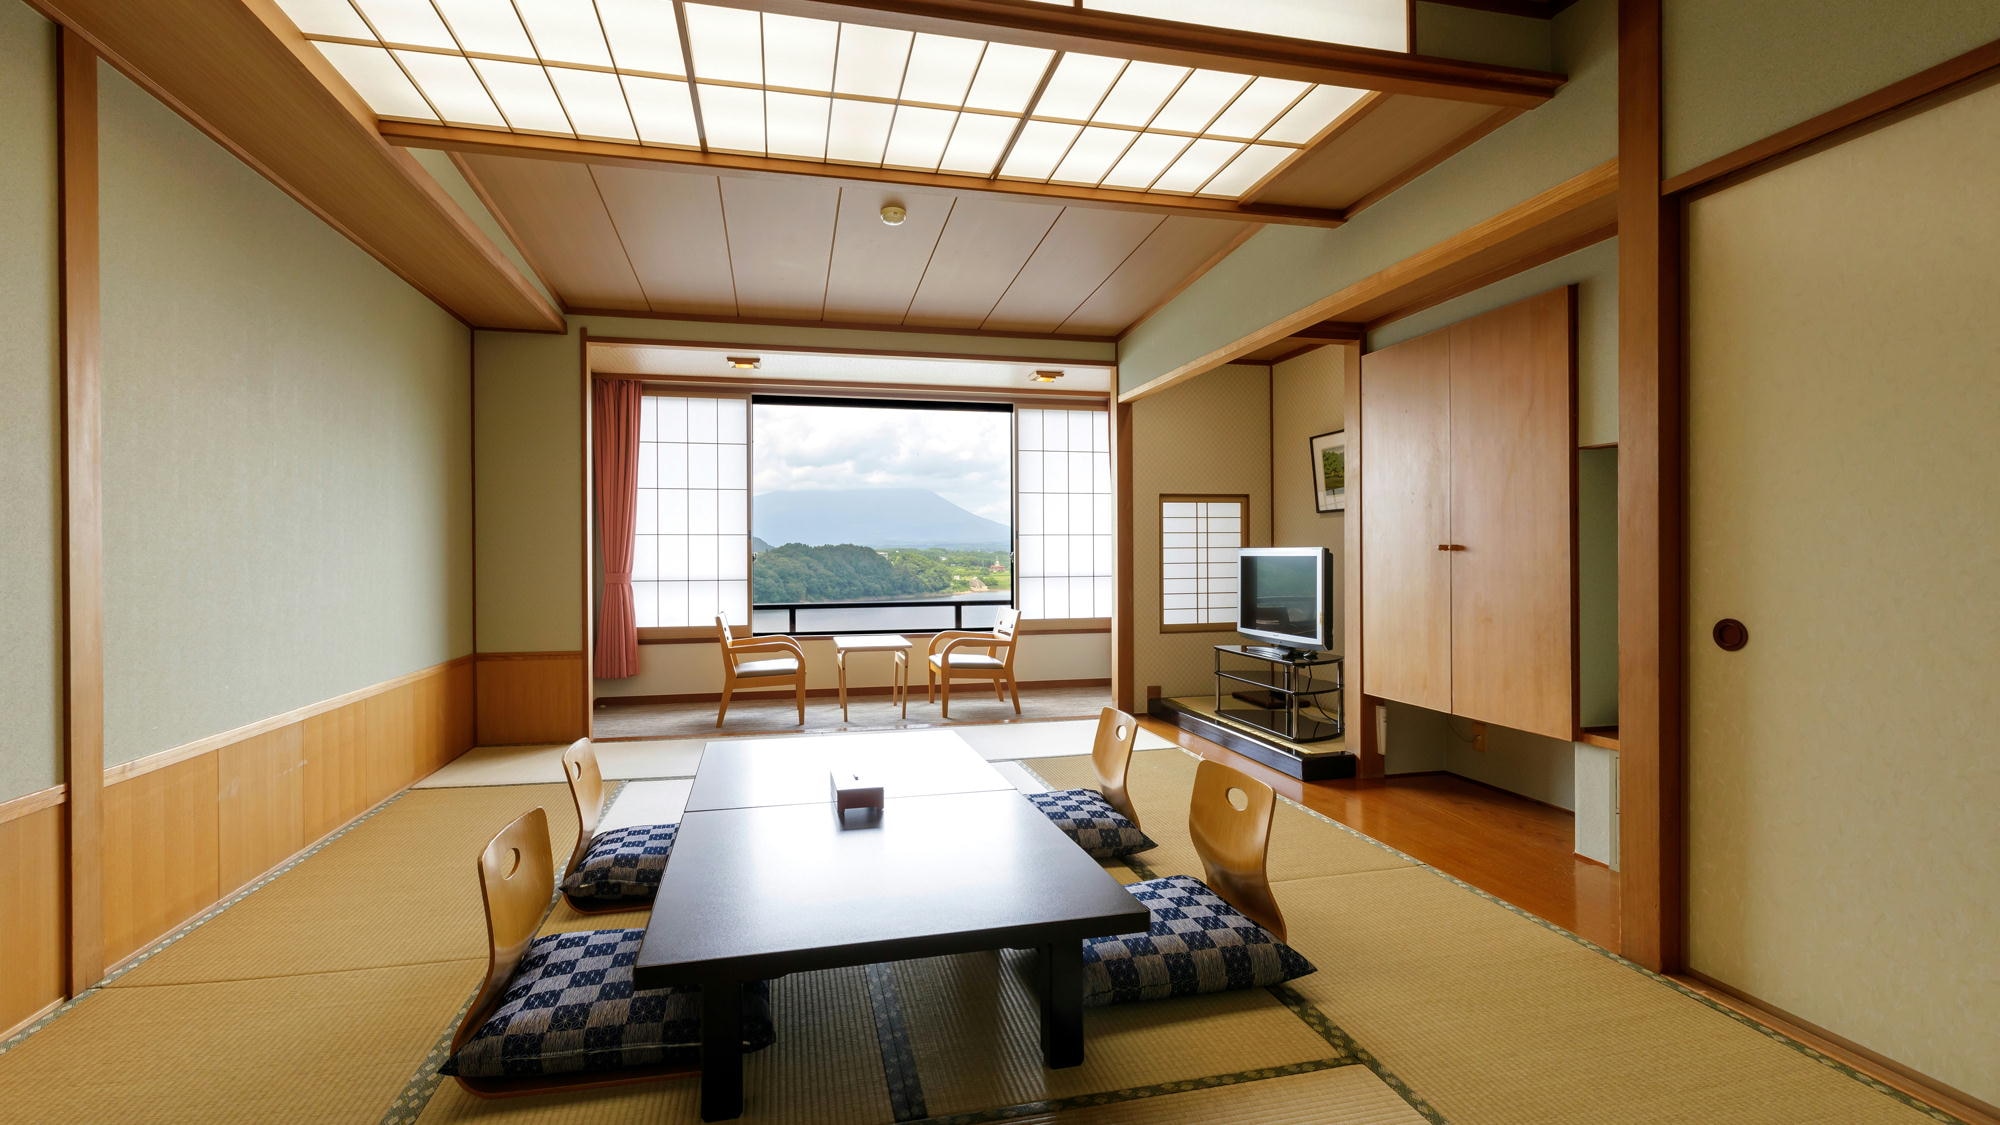 You can overlook Lake Gosho from all rooms.